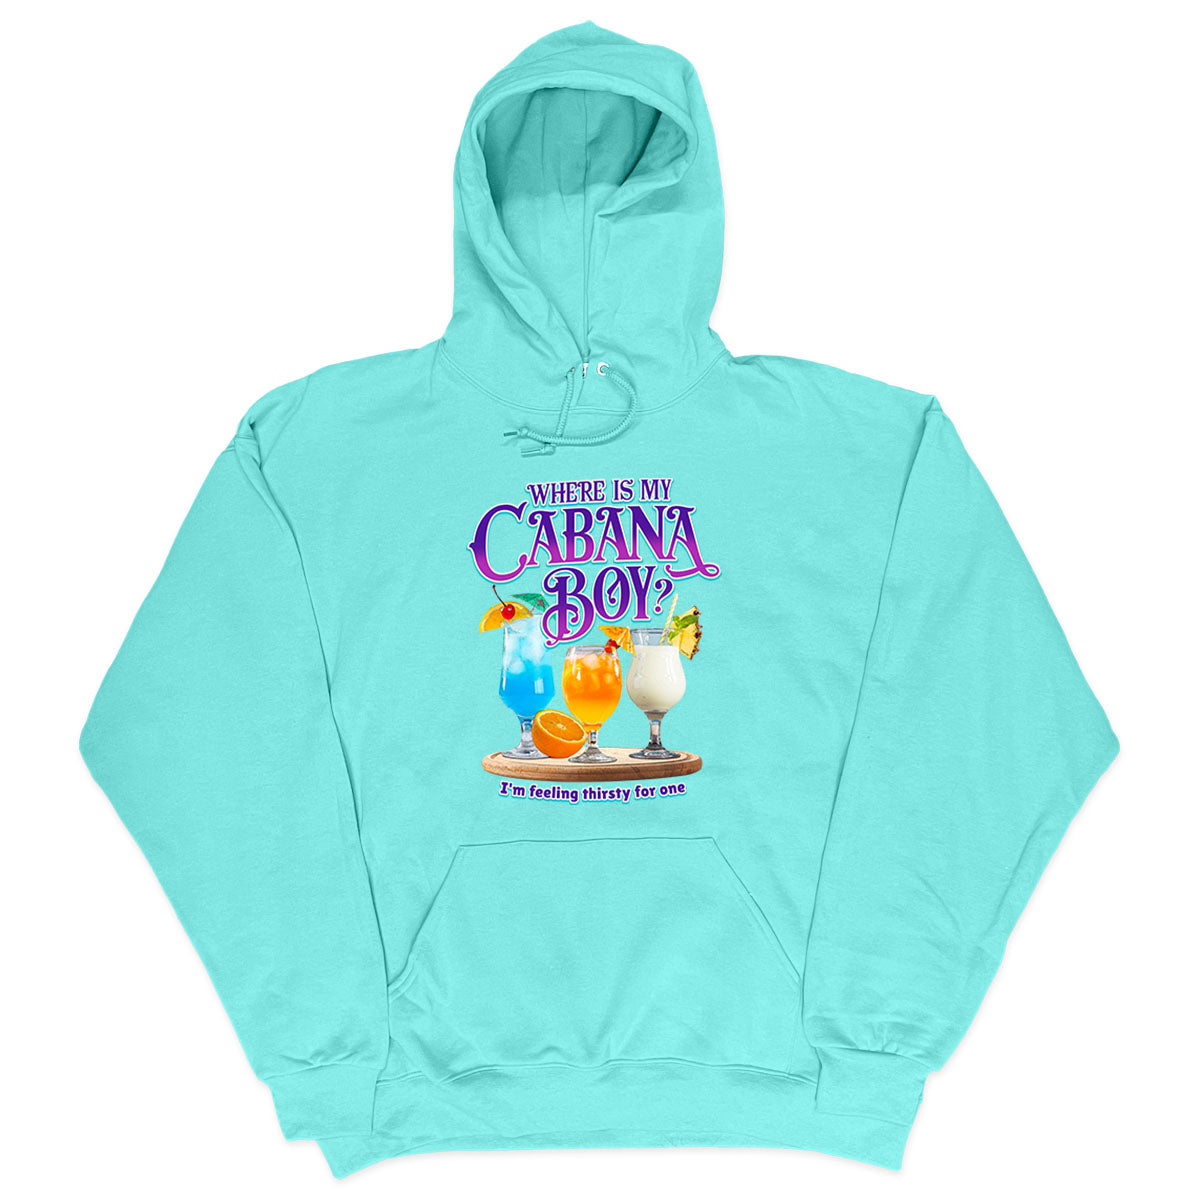 Where Is My Cabana Boy - I'm Feeling Thirsty Soft Style Hoodie Cool Mint